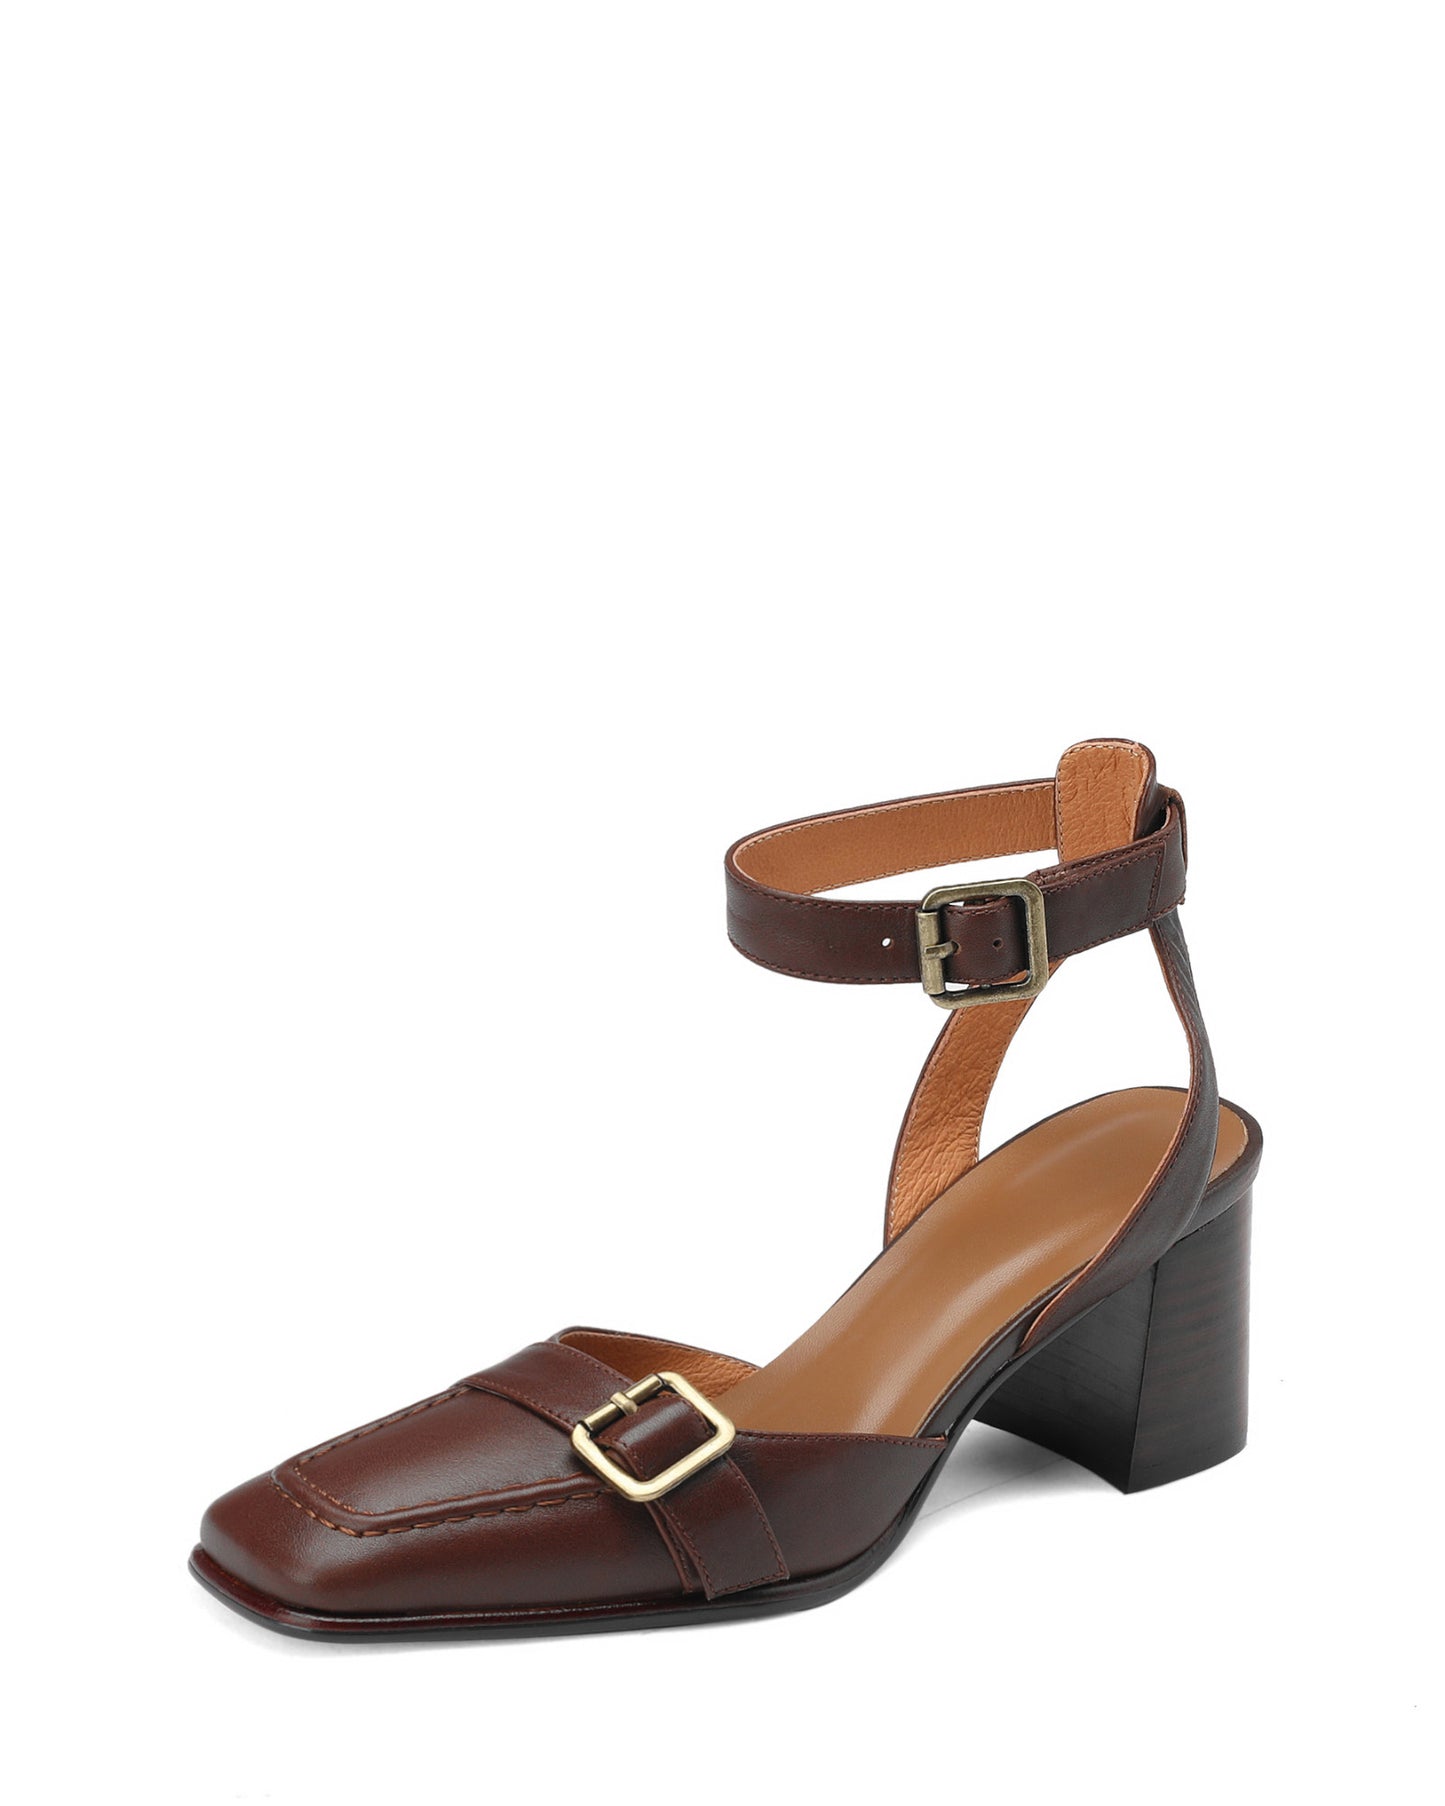 Lando-Square-Toe-Ankle-Strap-Brown-Leather-Heels